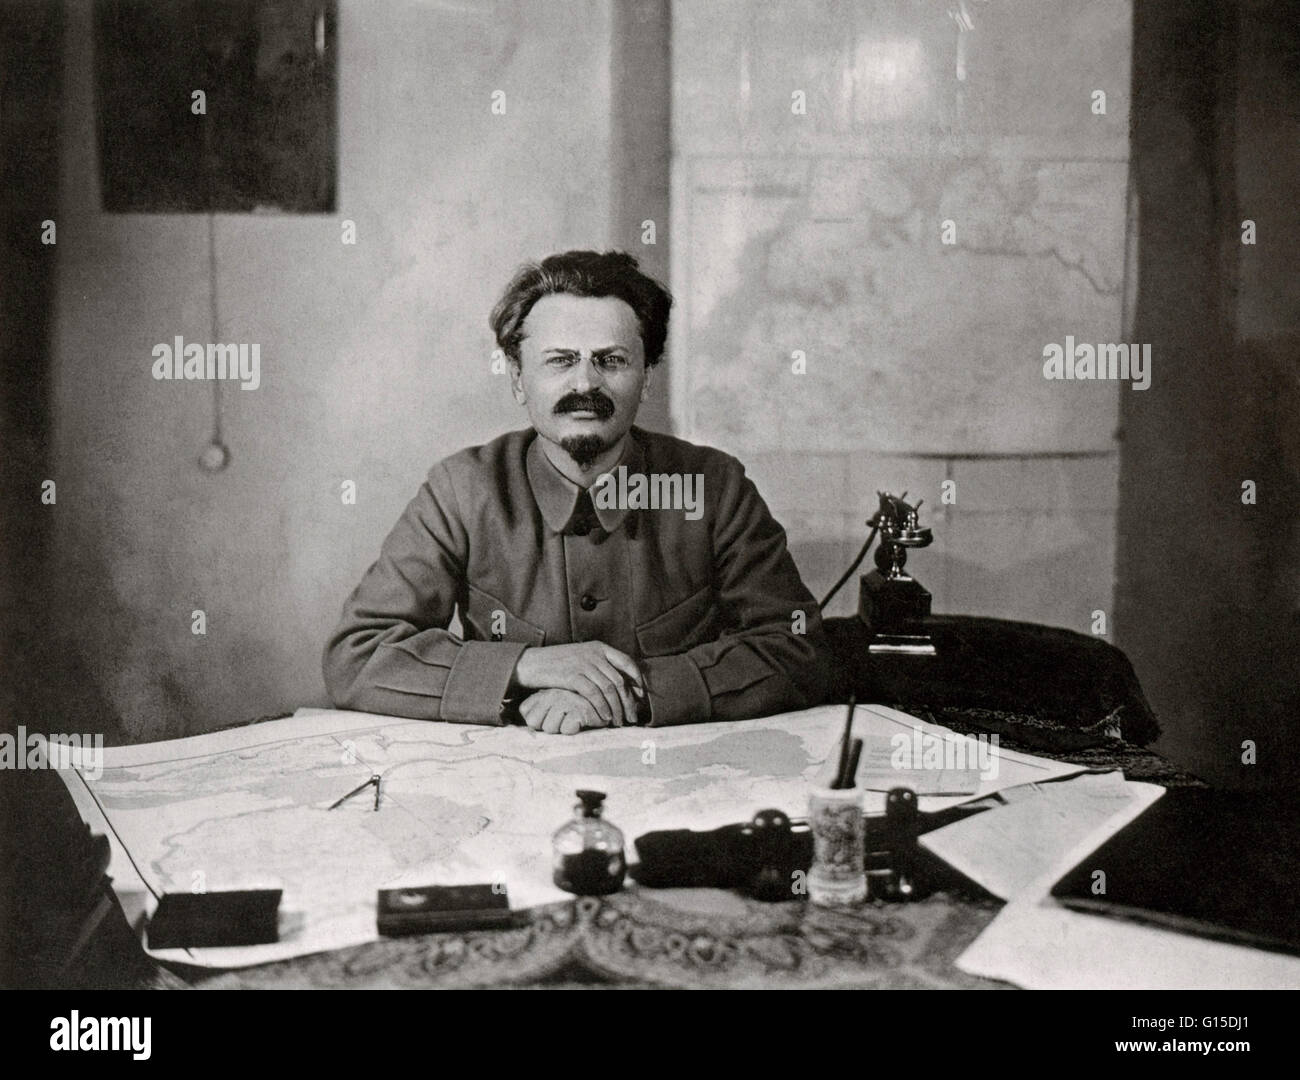 Undated photograph of Trotsky in his office as the Minister of War in Moscow. Leon Trotsky (November 7, 1879 - August 21, 1940) was a Russian Marxist revolutionary and theorist. He joined the Bolsheviks prior to the 1917 October Revolution and was a major Stock Photo